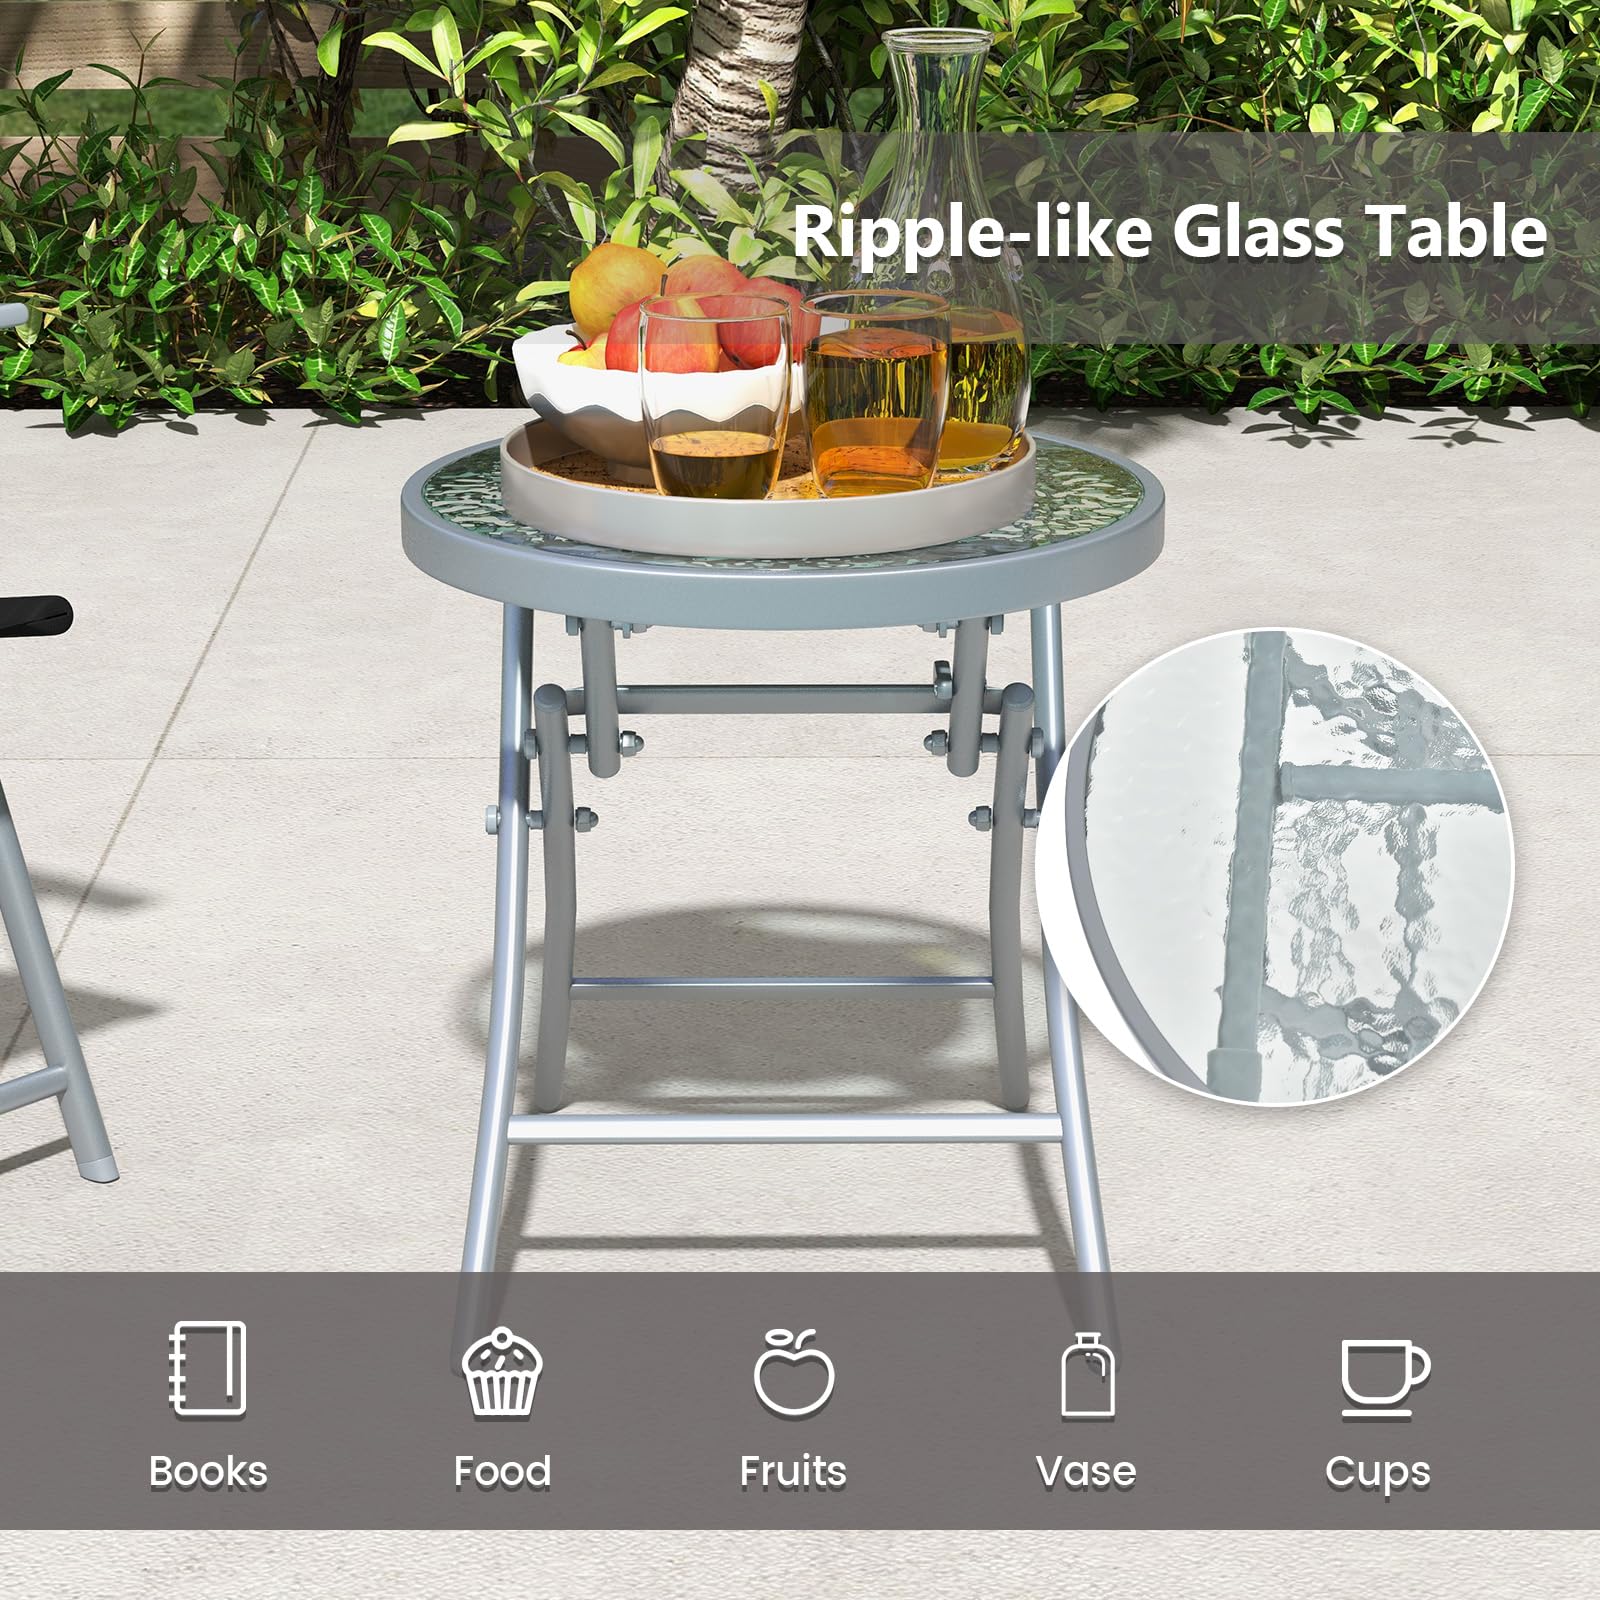 Giantex 3PCS Patio Bistro Set, Folding Outdoor Patio Table Set with 2 Foldable Chairs, 1 Ripple-Like Glass Table